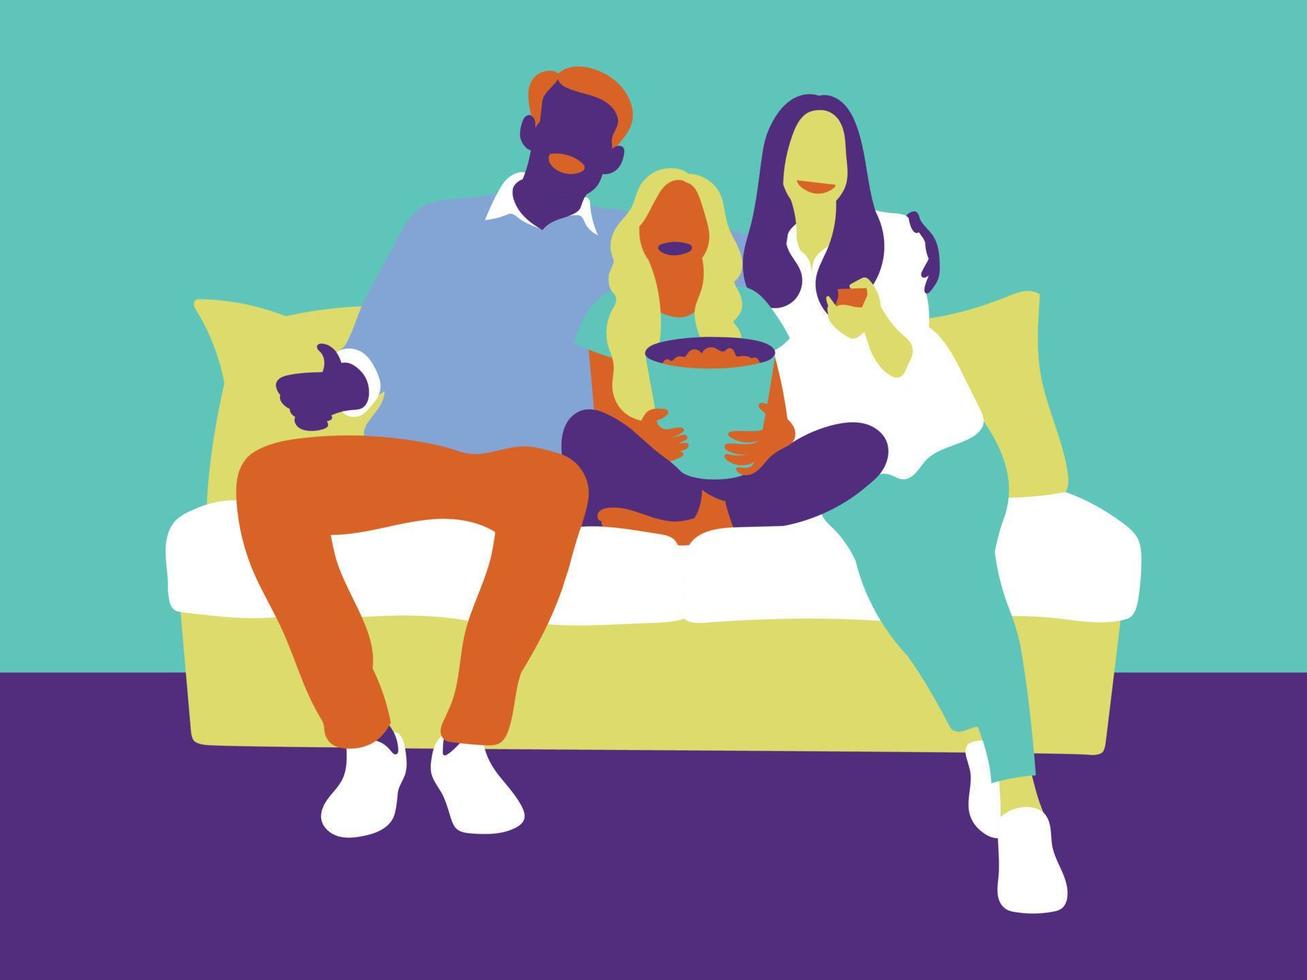 Affectionate family watching TV together at home vector